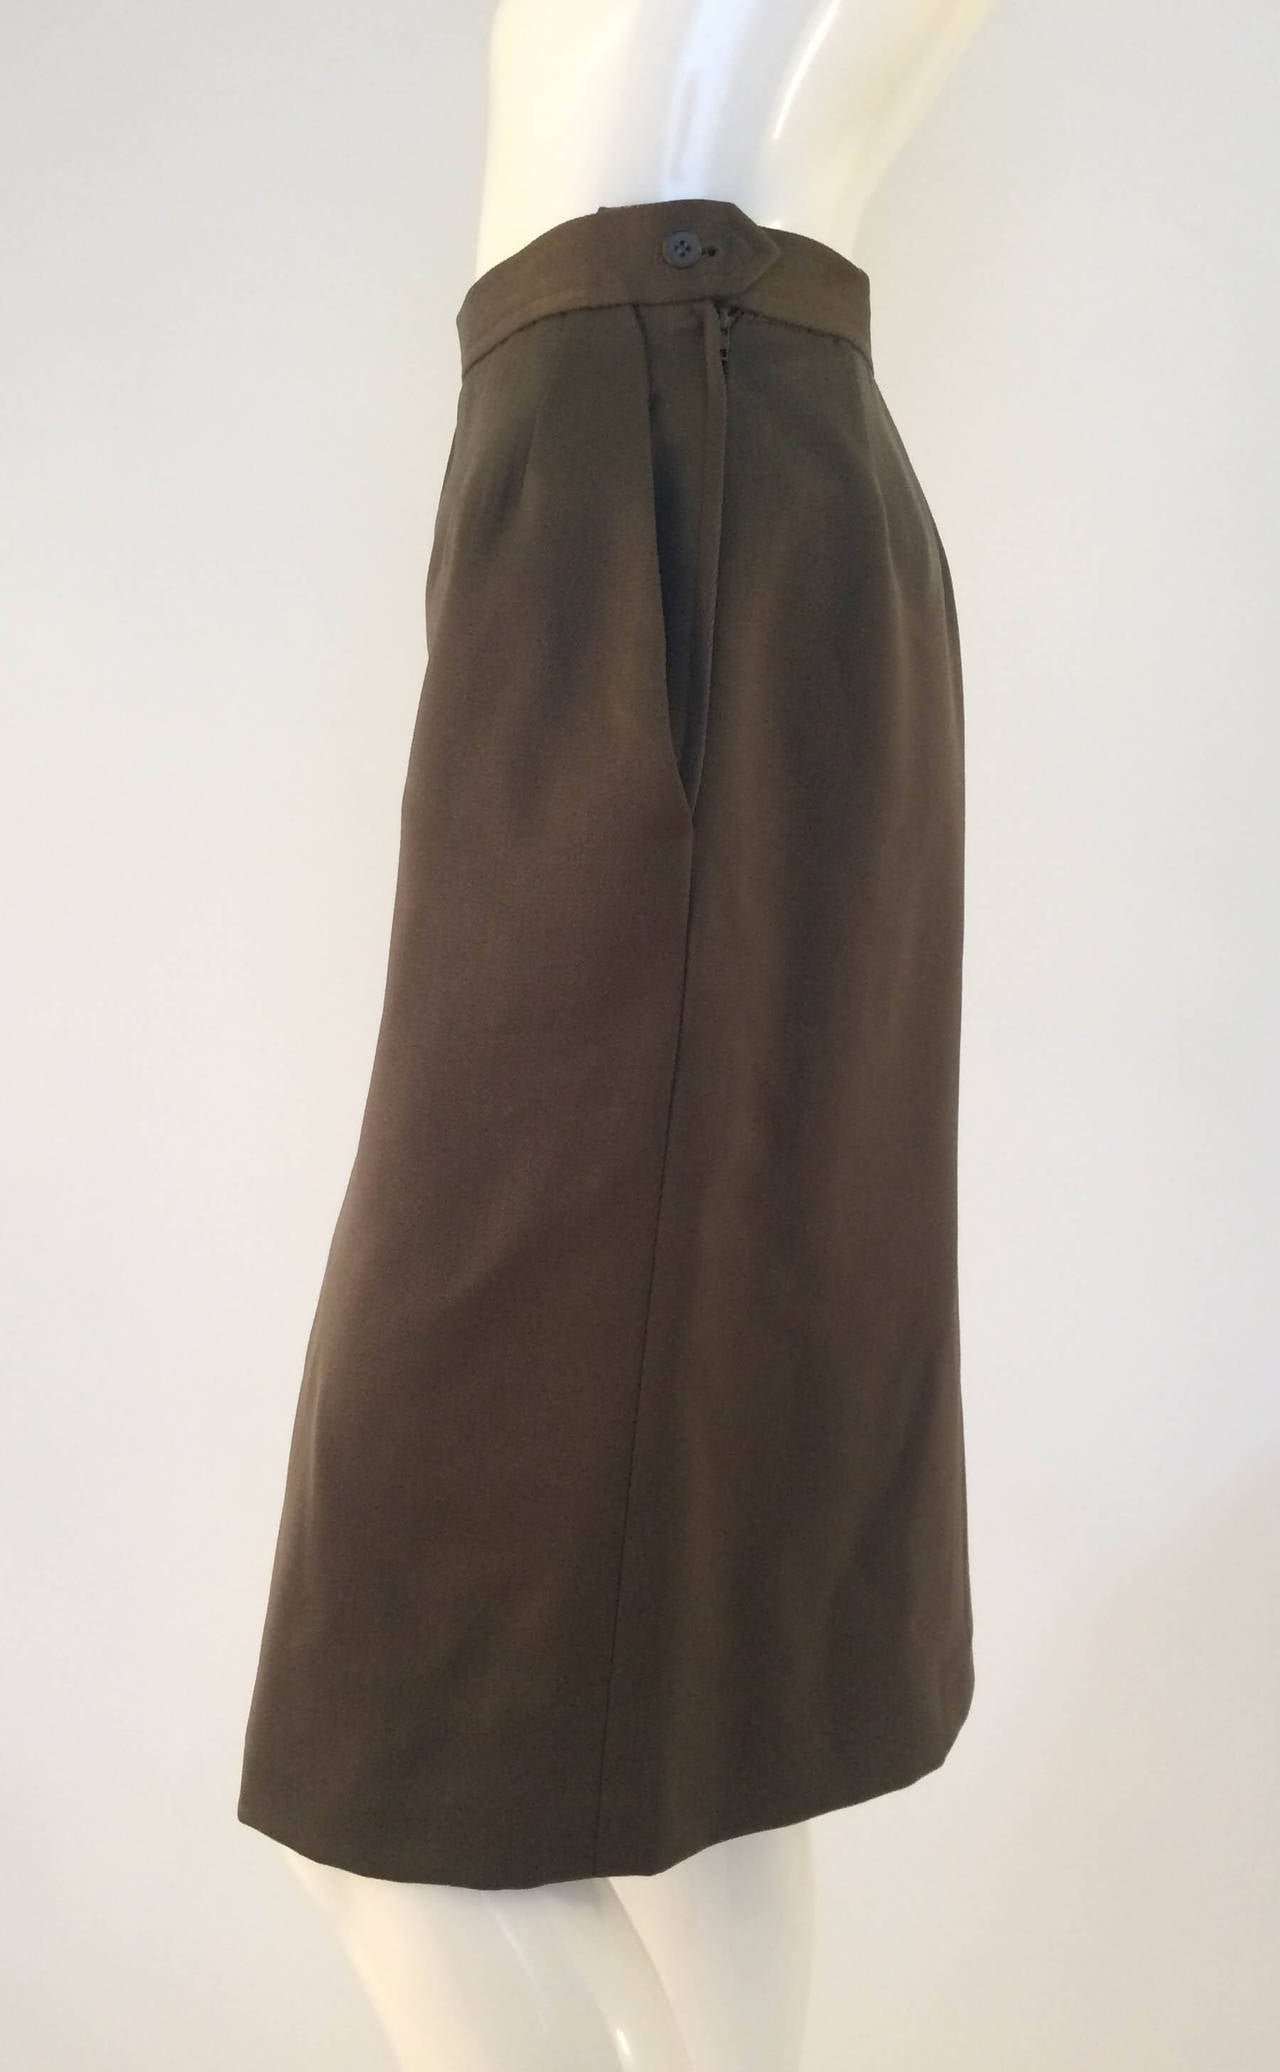 Very Elegant Yves Saint Laurent Rive Gauche Skirt. Most certainly late 1980s, but maybe very early 1990s. 100% wool with lining, but not heavy. Dark / military green. Practical side pockets. The cut goes straight down to the hips. Made in France.